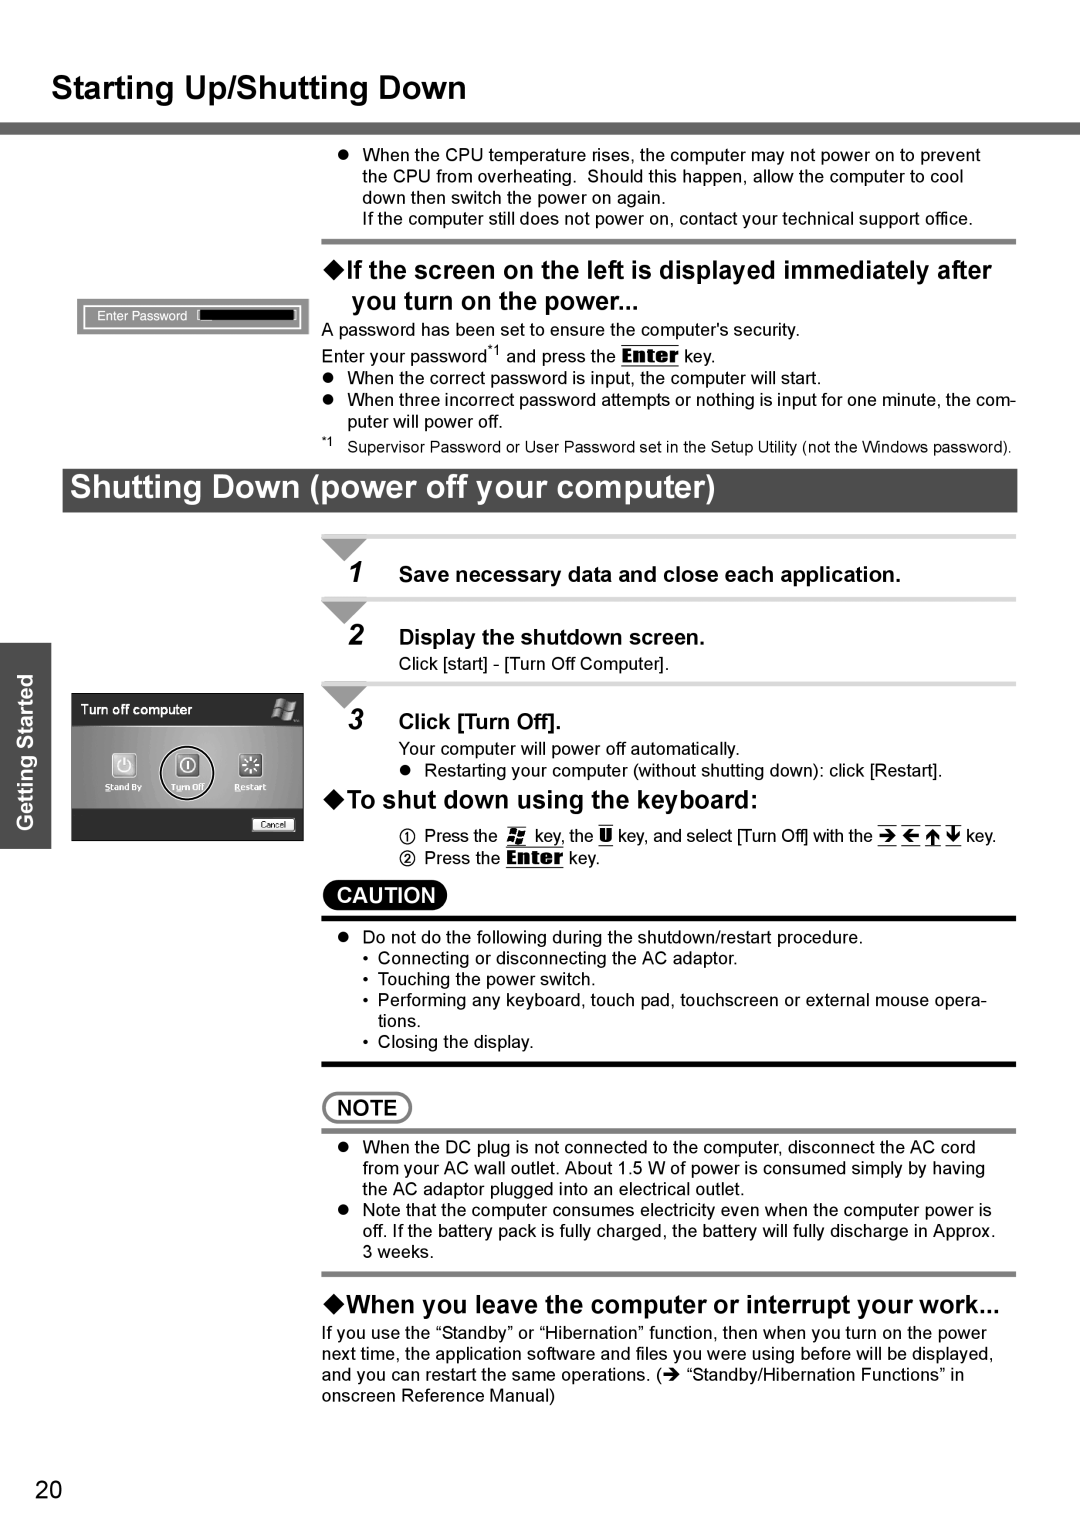 Panasonic CF-T4 Starting Up/Shutting Down, Shutting Down power off your computer, you turn on the power, Click Turn Off 